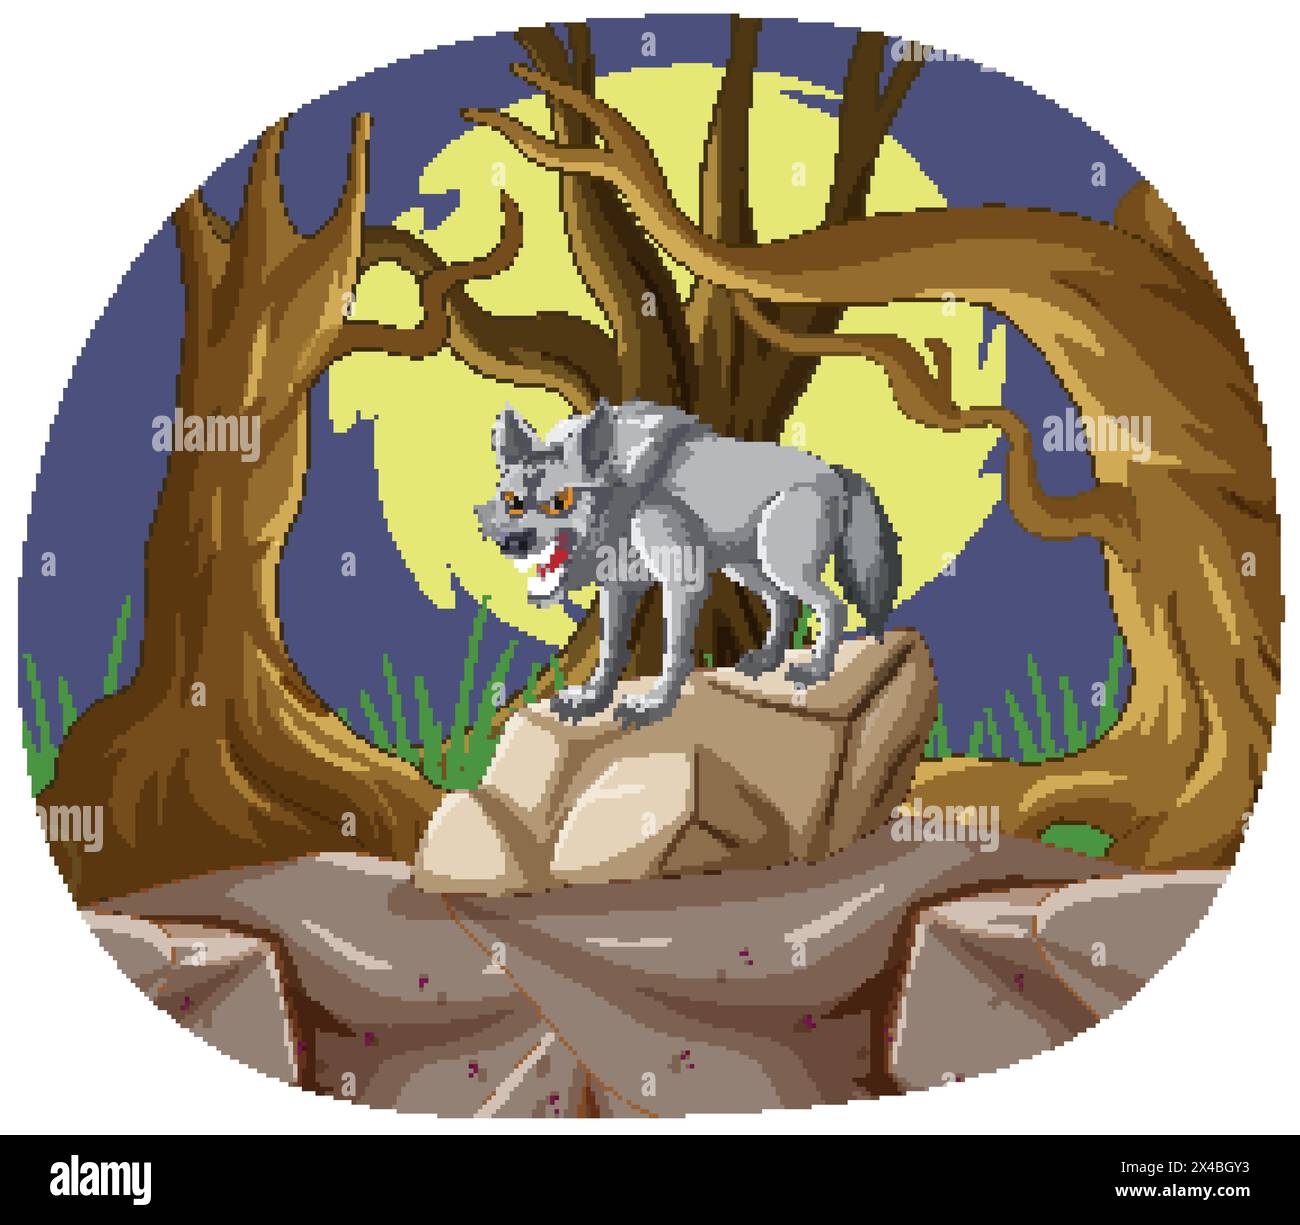 Illustration of a wolf howling on a rocky outcrop. Stock Vector